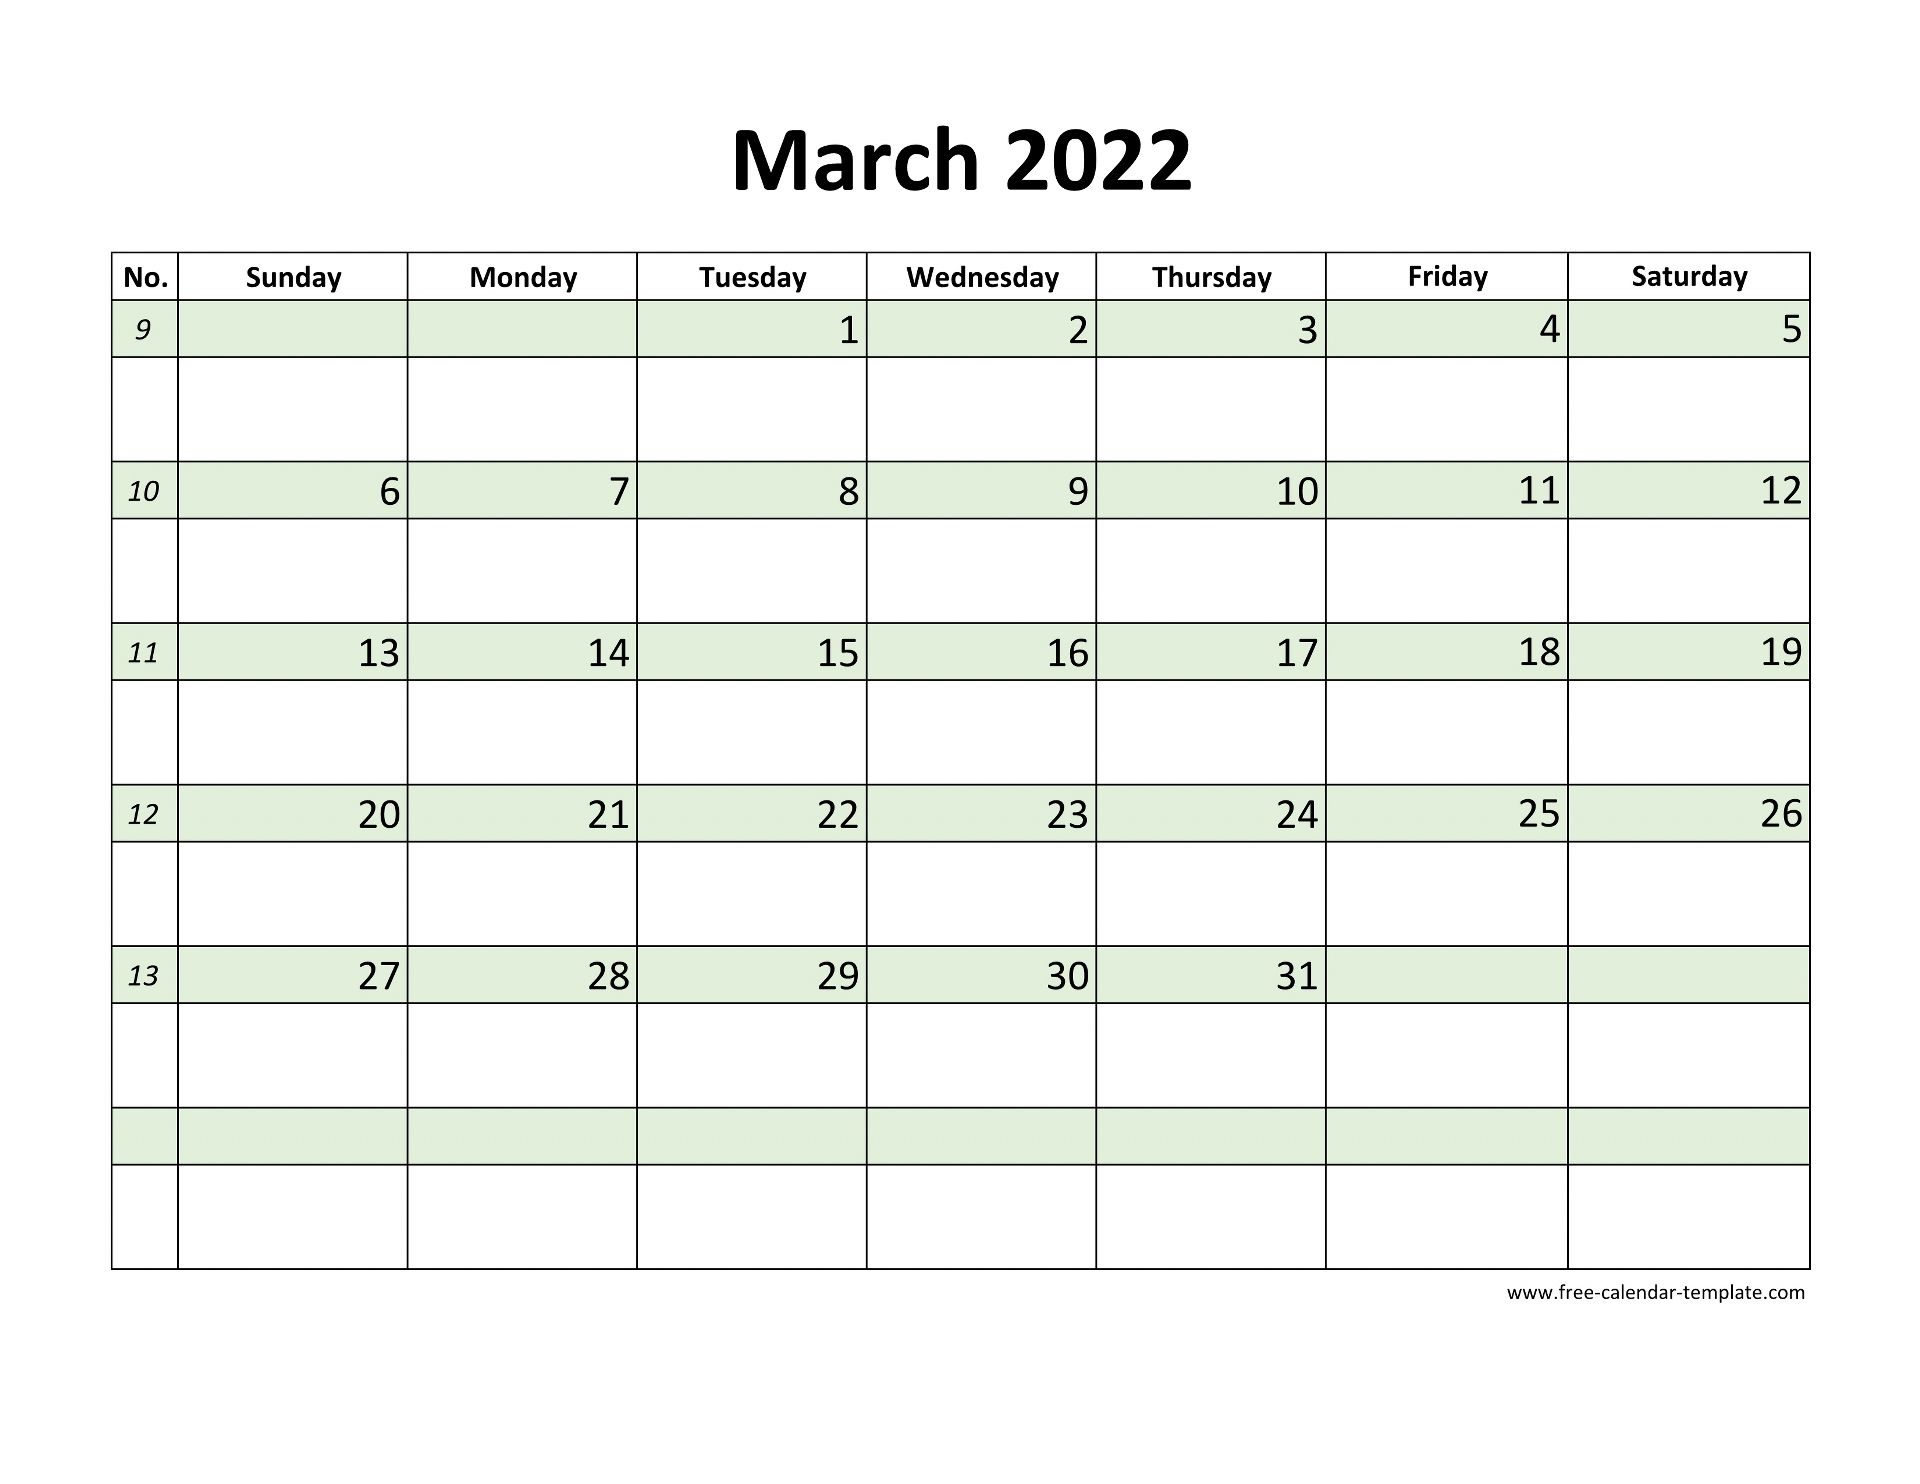 March 2022 Free Calendar Tempplate | Freecalendartemplate pertaining to Free 2022 Monthly Calendars That Are Printable